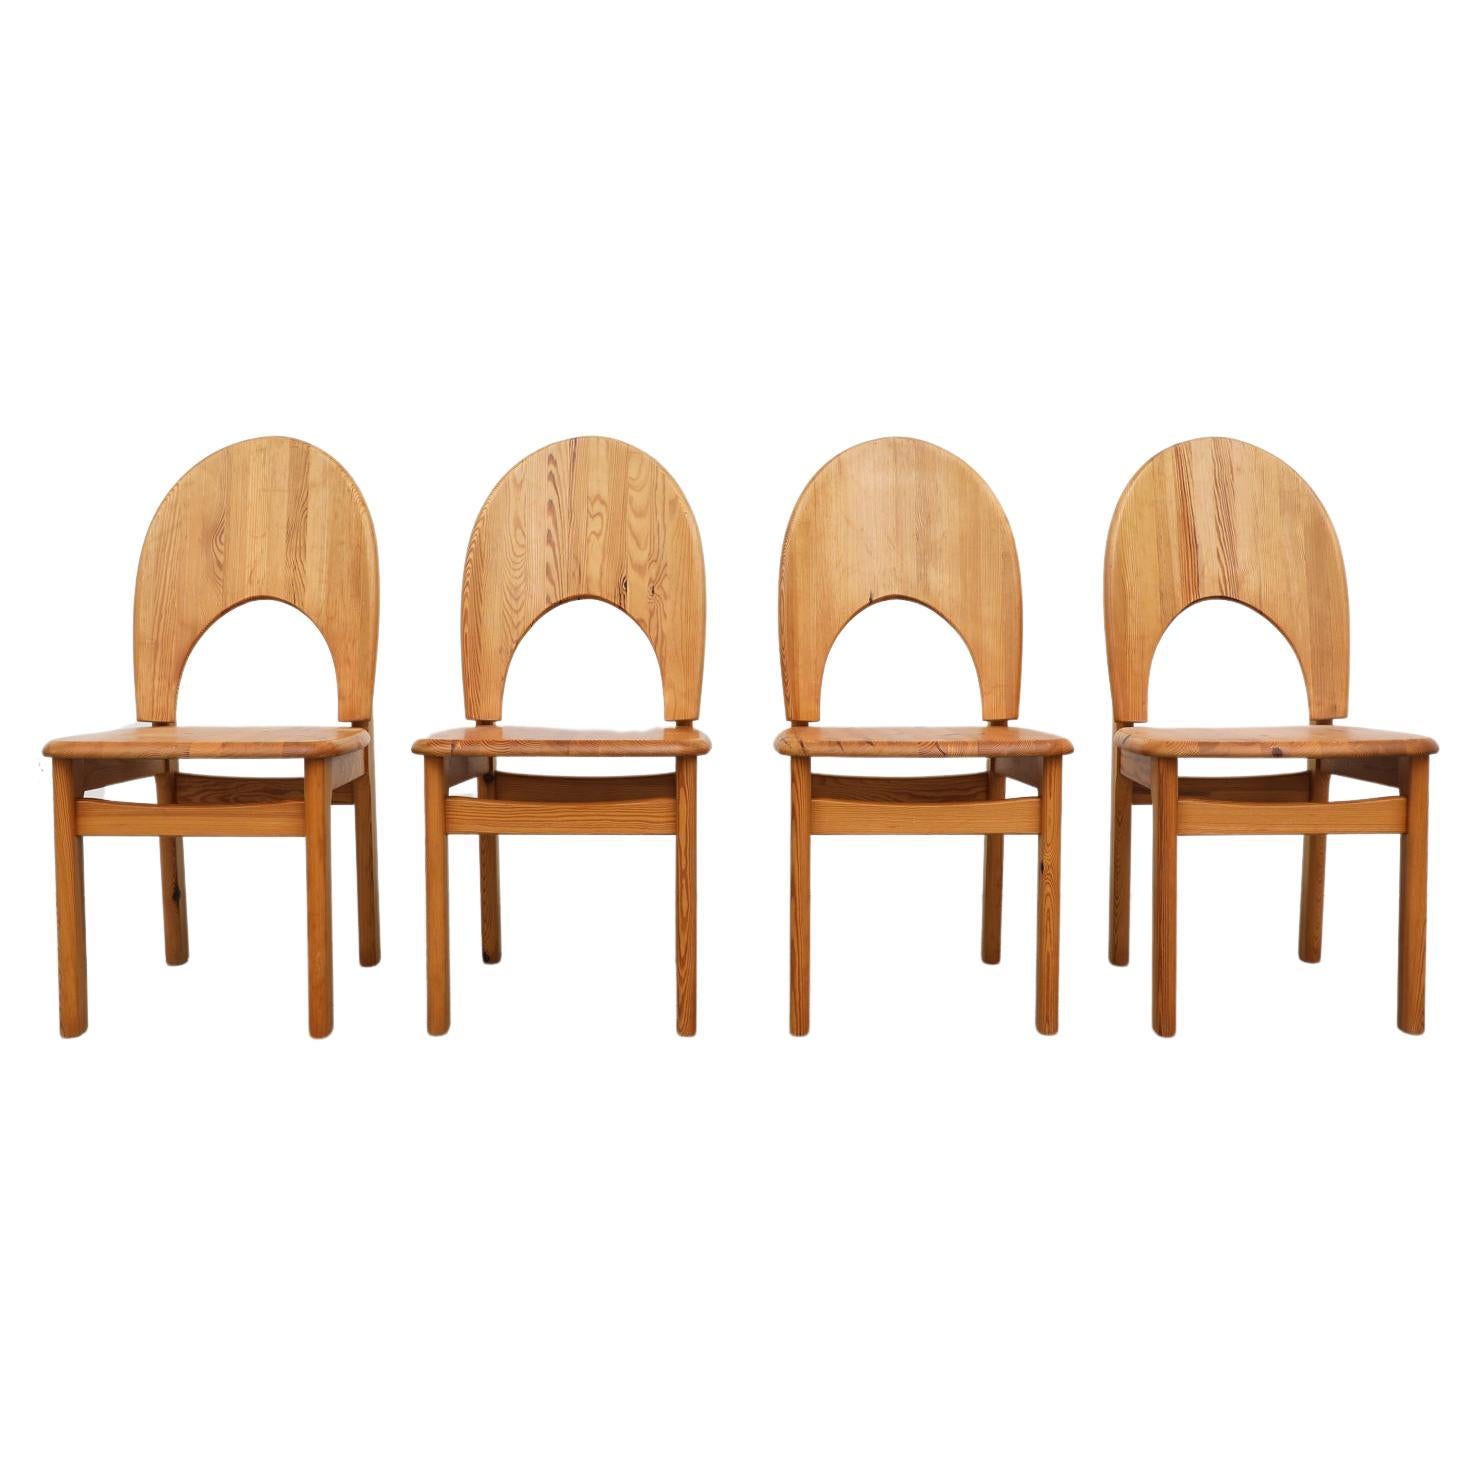 Set of 4 Rainer Daumiller Mid-Century Pine Chairs For Sale